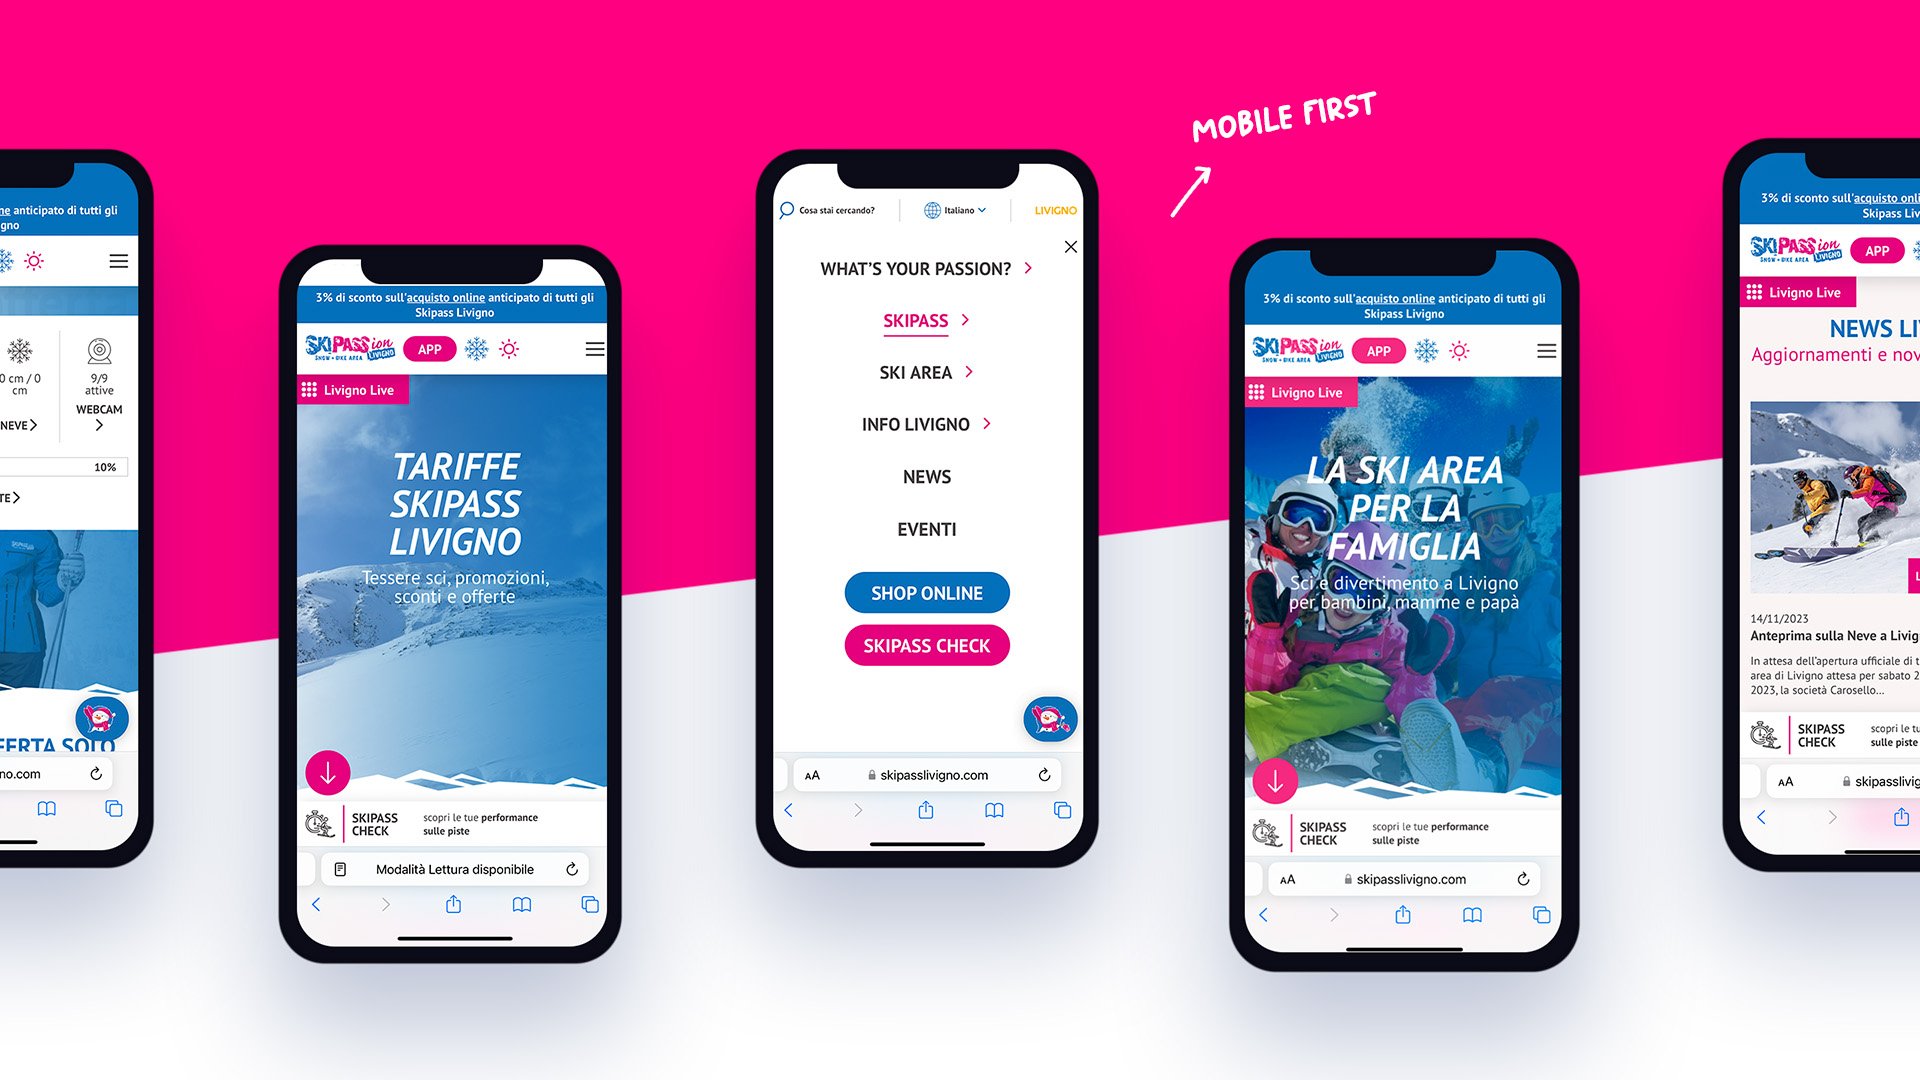 Skipass mobile first